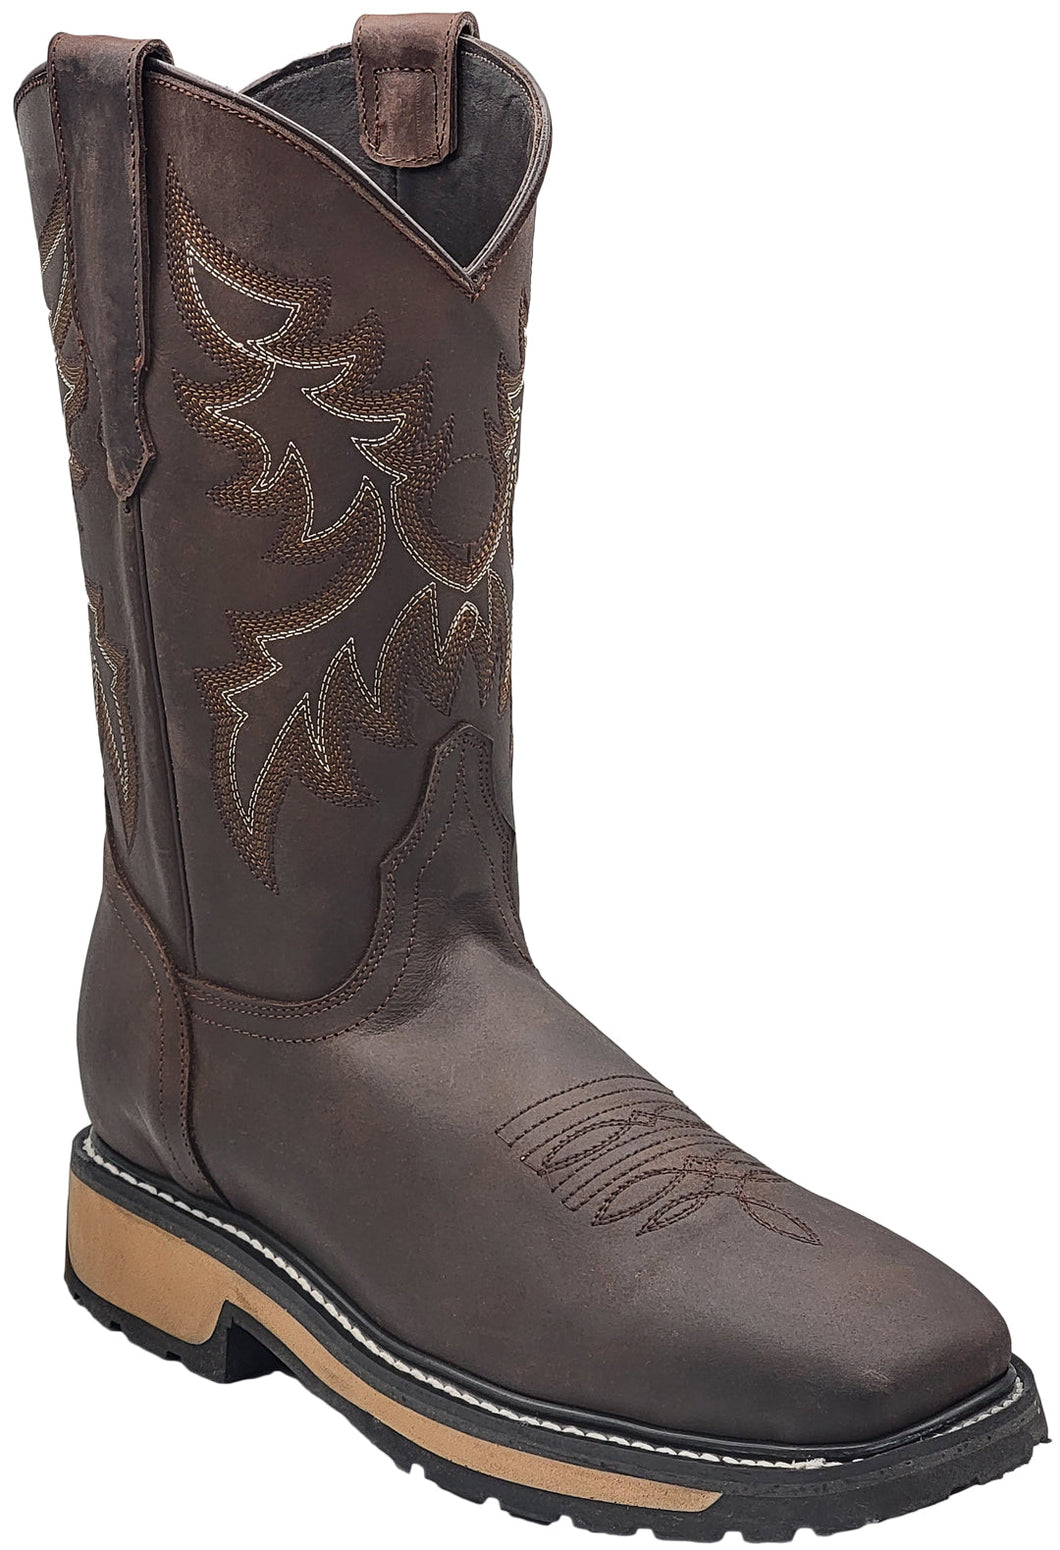 Silverton Foreman All Leather Wide Square Toe Boots (Brown)